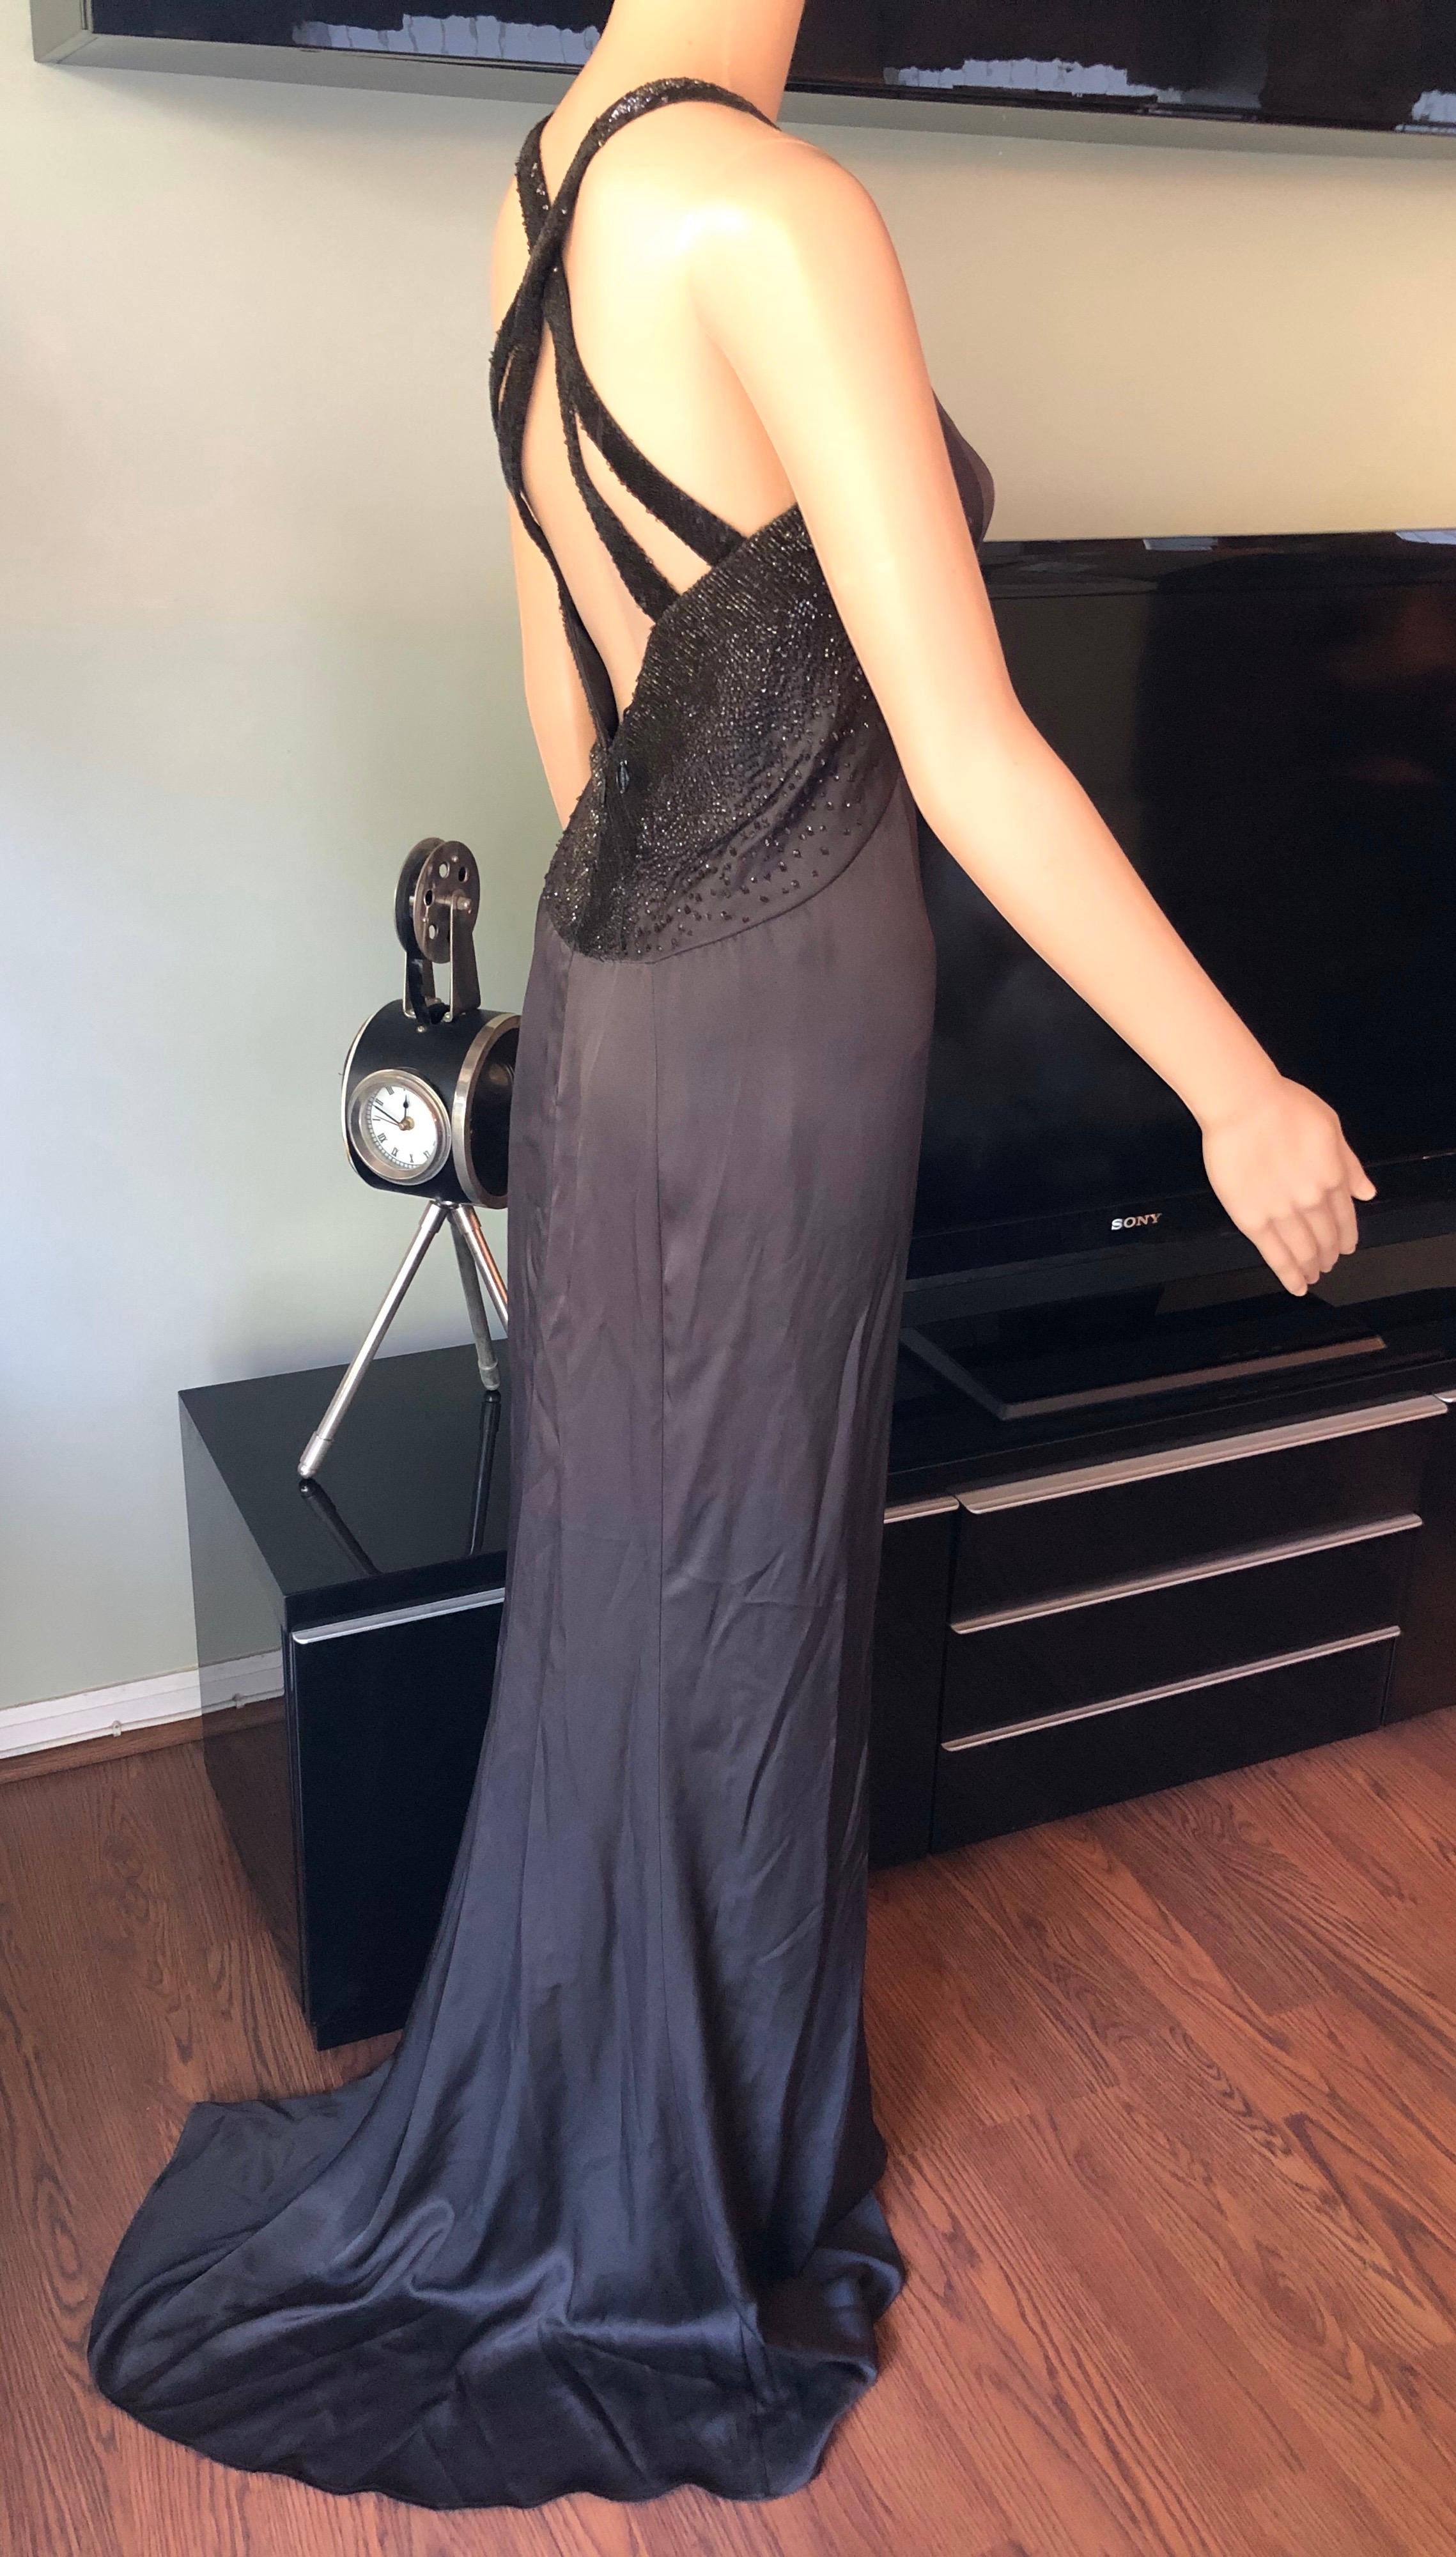 Tom Ford for Gucci c. 2001 Cutout Back Embellished Brown Evening Dress Gown In Excellent Condition For Sale In Naples, FL